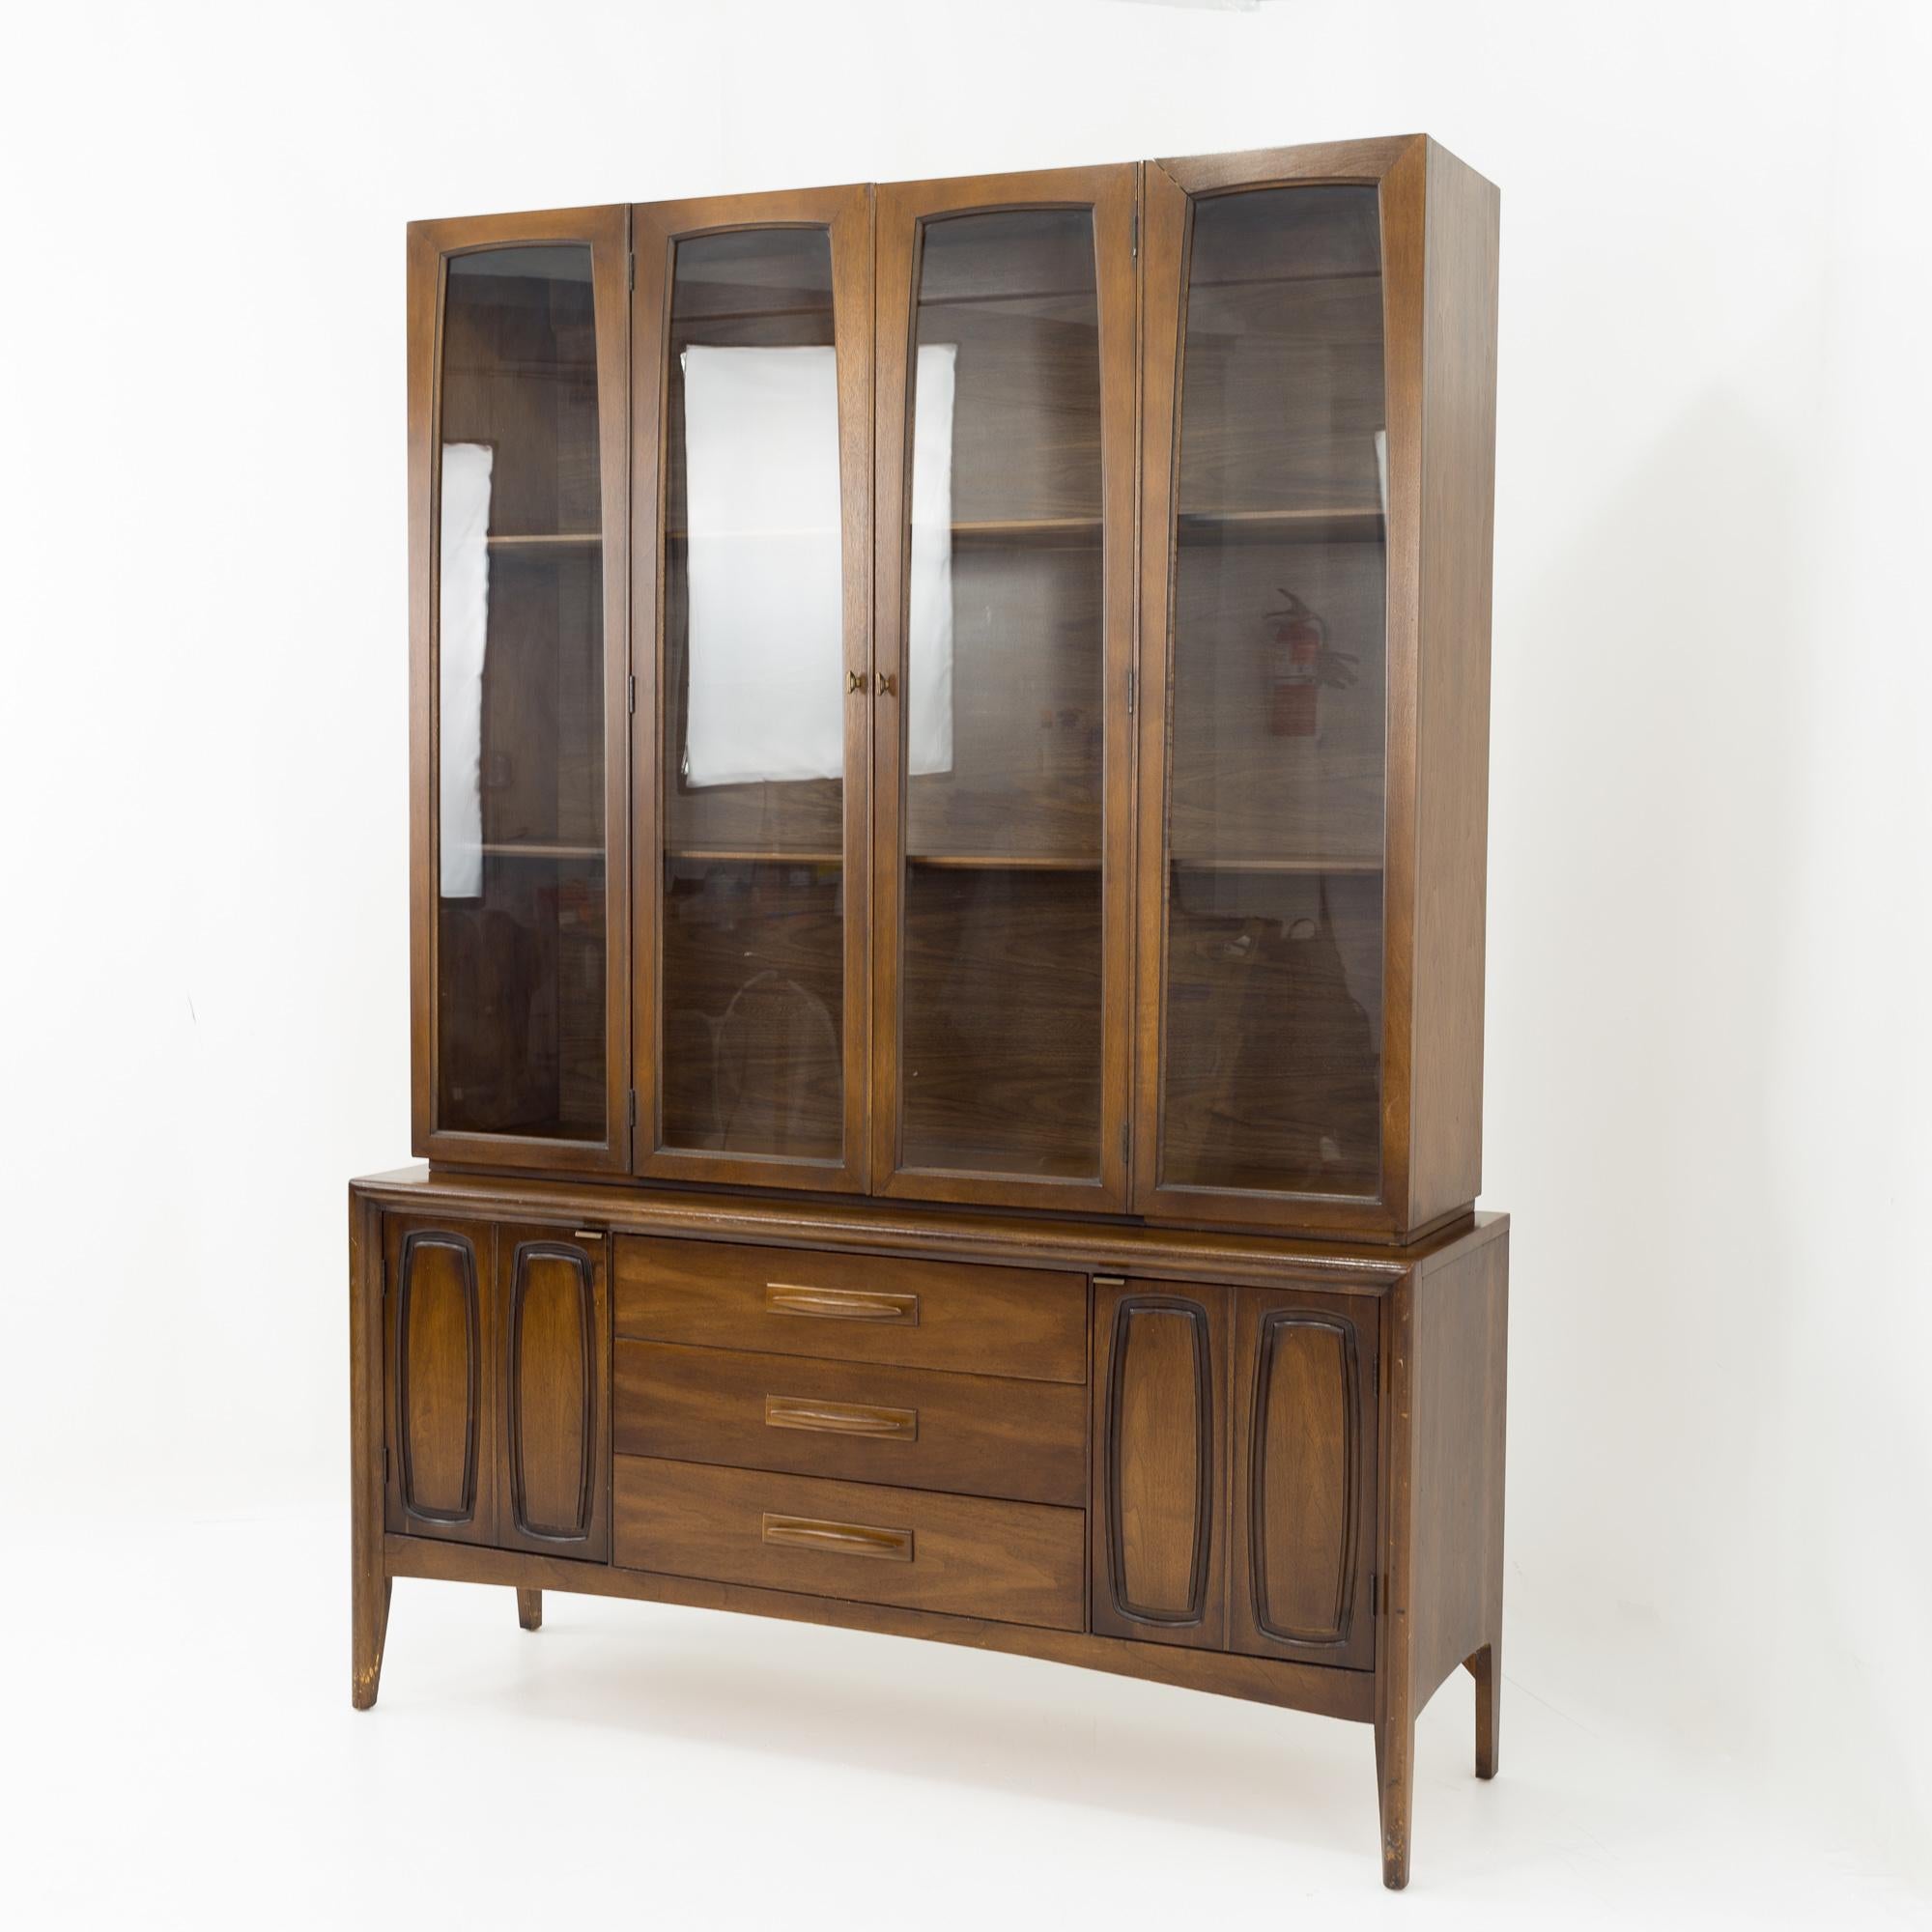 Broyhill emphasis mid century walnut china cabinet
This china cabinet measures: 53.25 wide x 13 deep x 76 inches high

All pieces of furniture can be had in what we call restored vintage condition. That means the piece is restored upon purchase